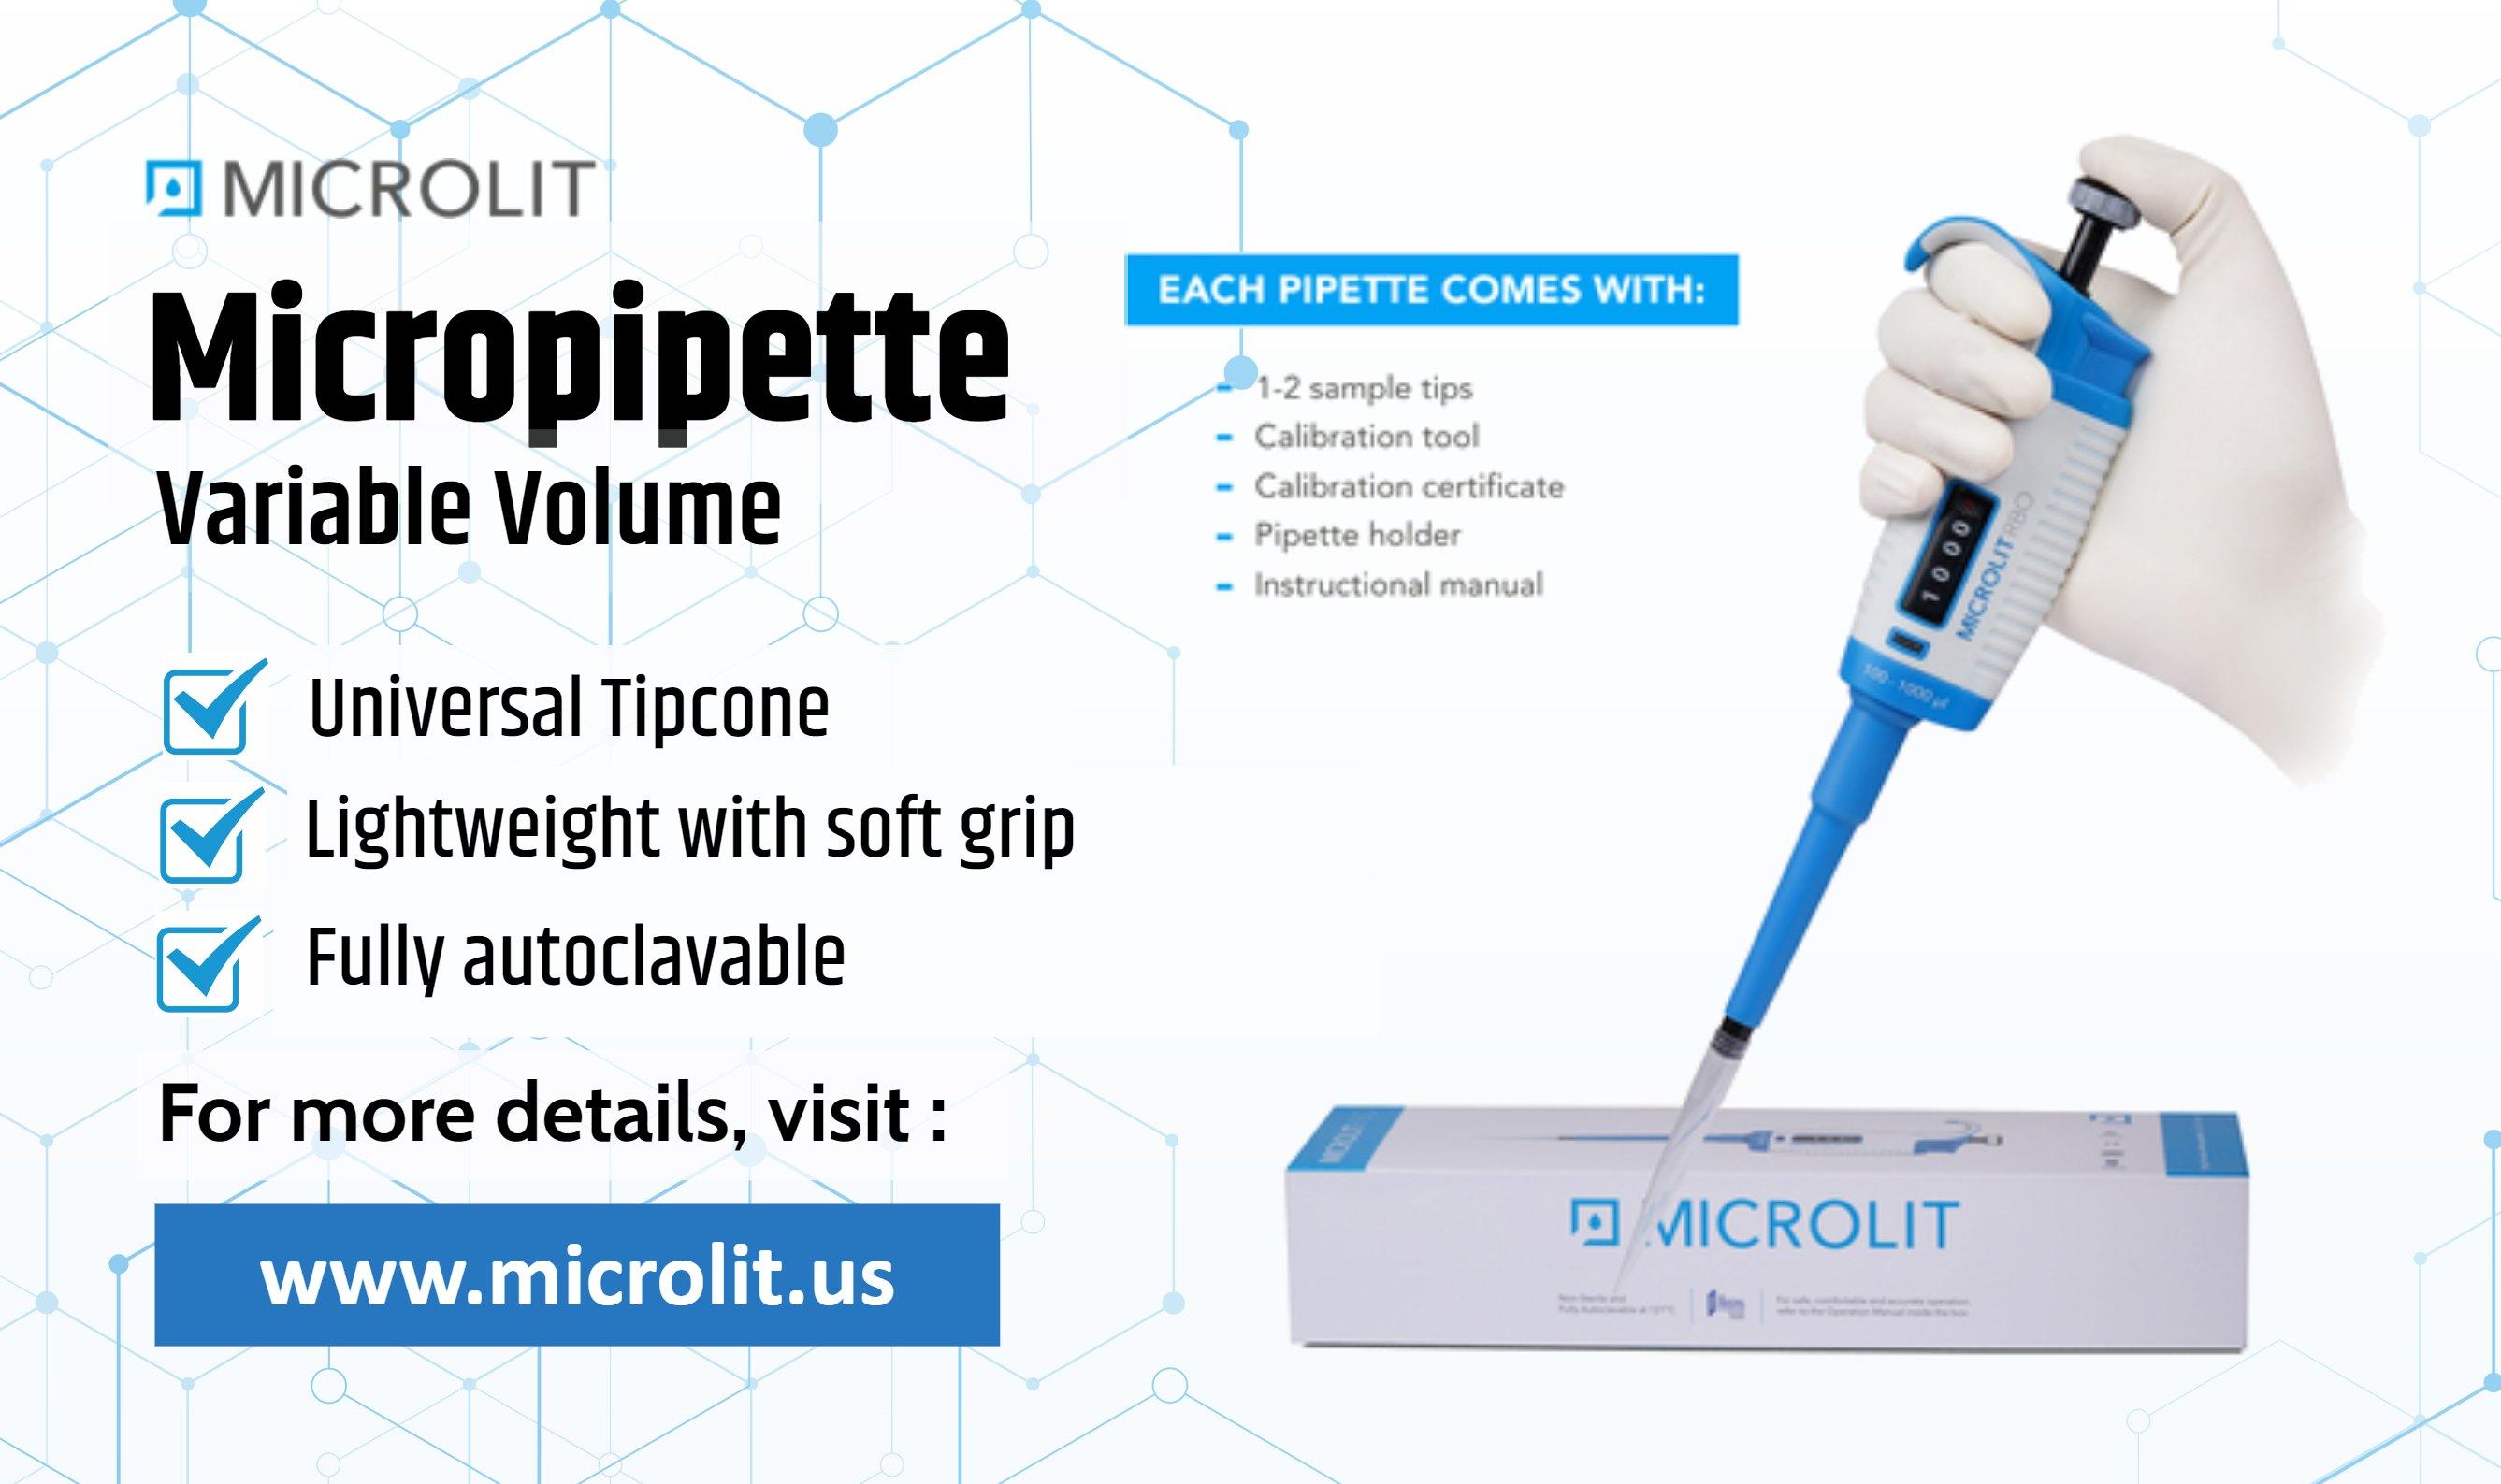 Image - Microlit offers the best quality & lightweight #VariableVolumePicropipette in USA for precise liquid sampling...